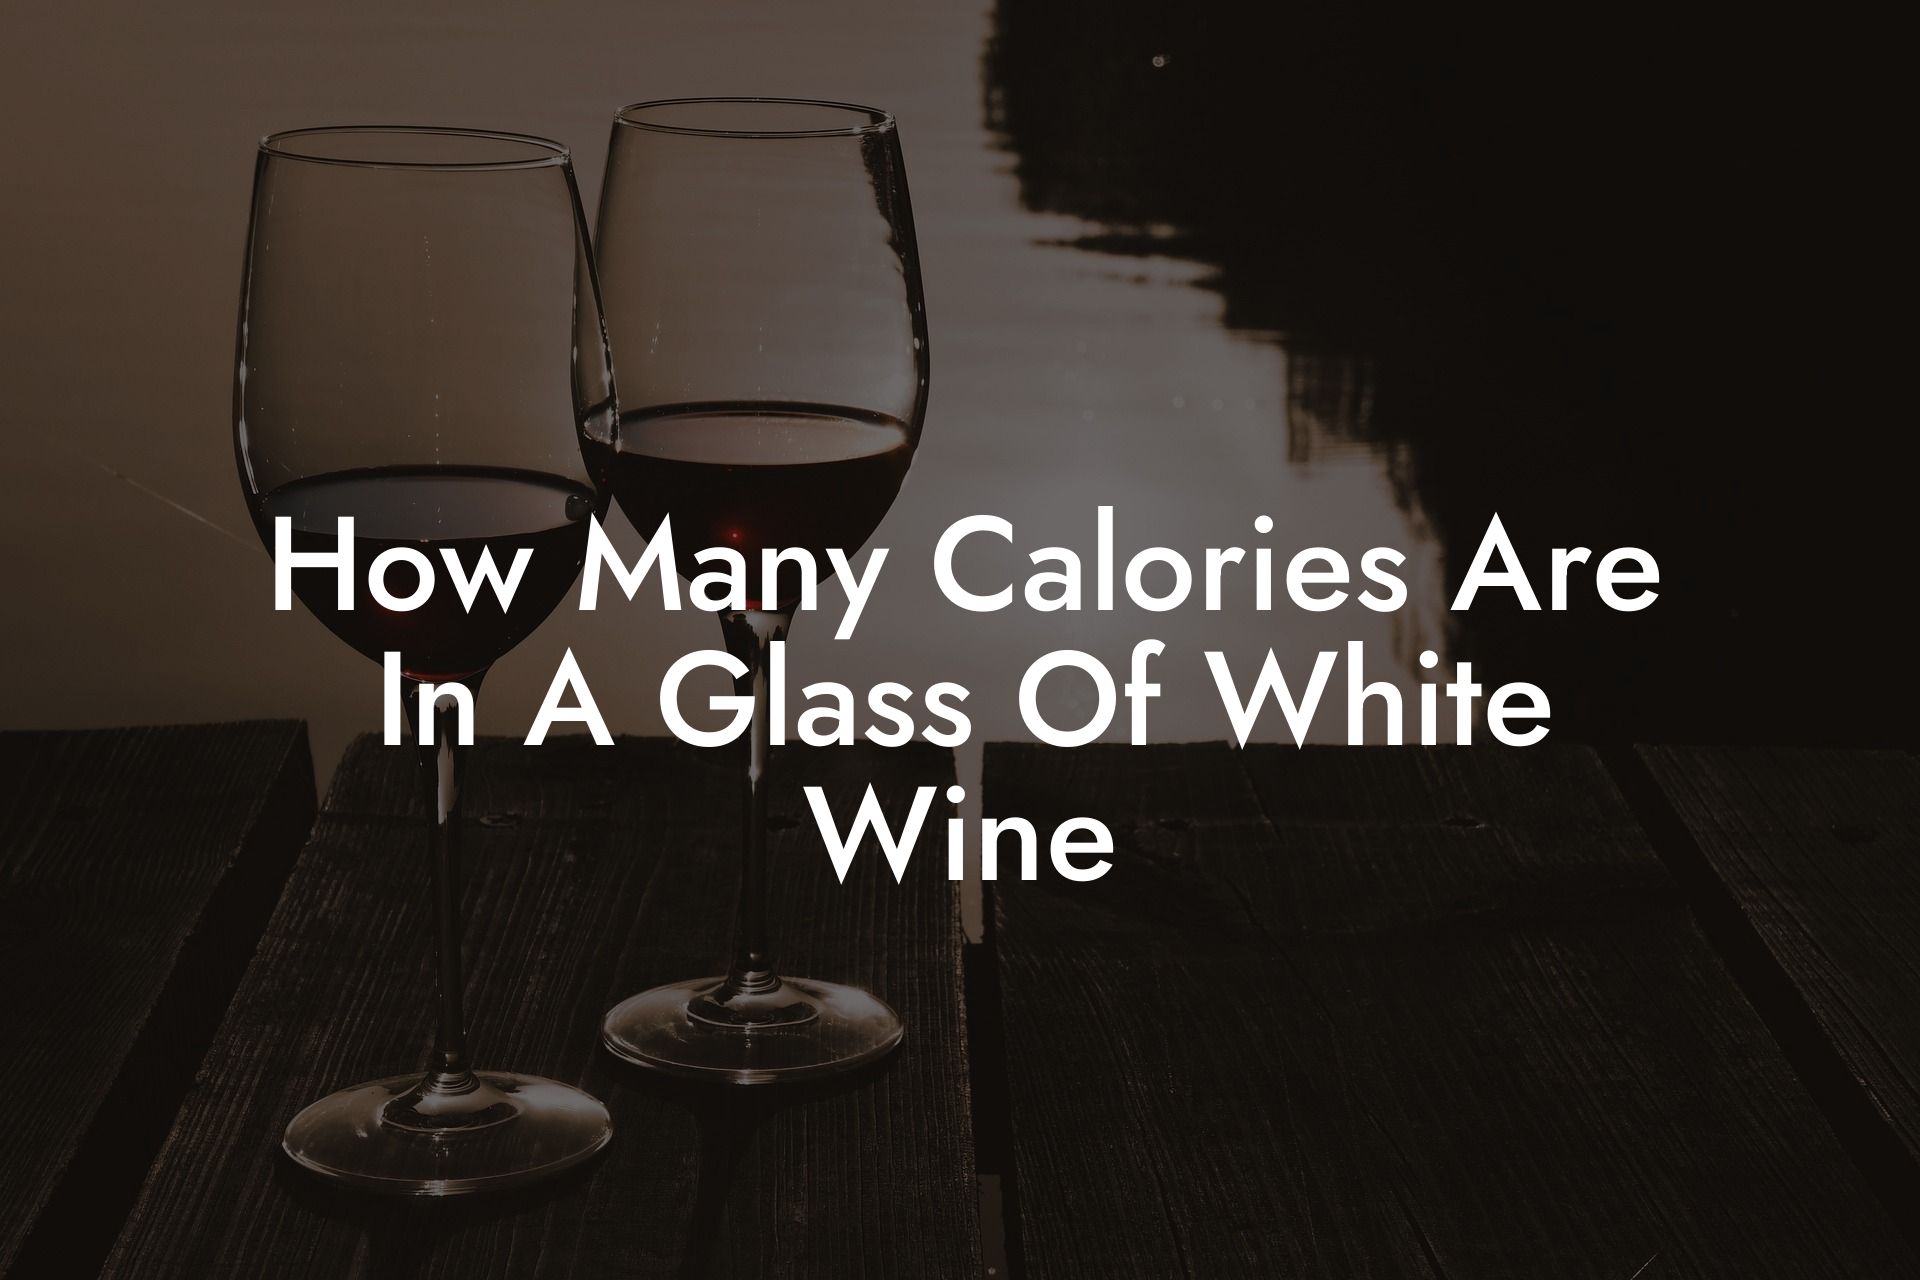 How Many Calories Are In A Glass Of White Wine